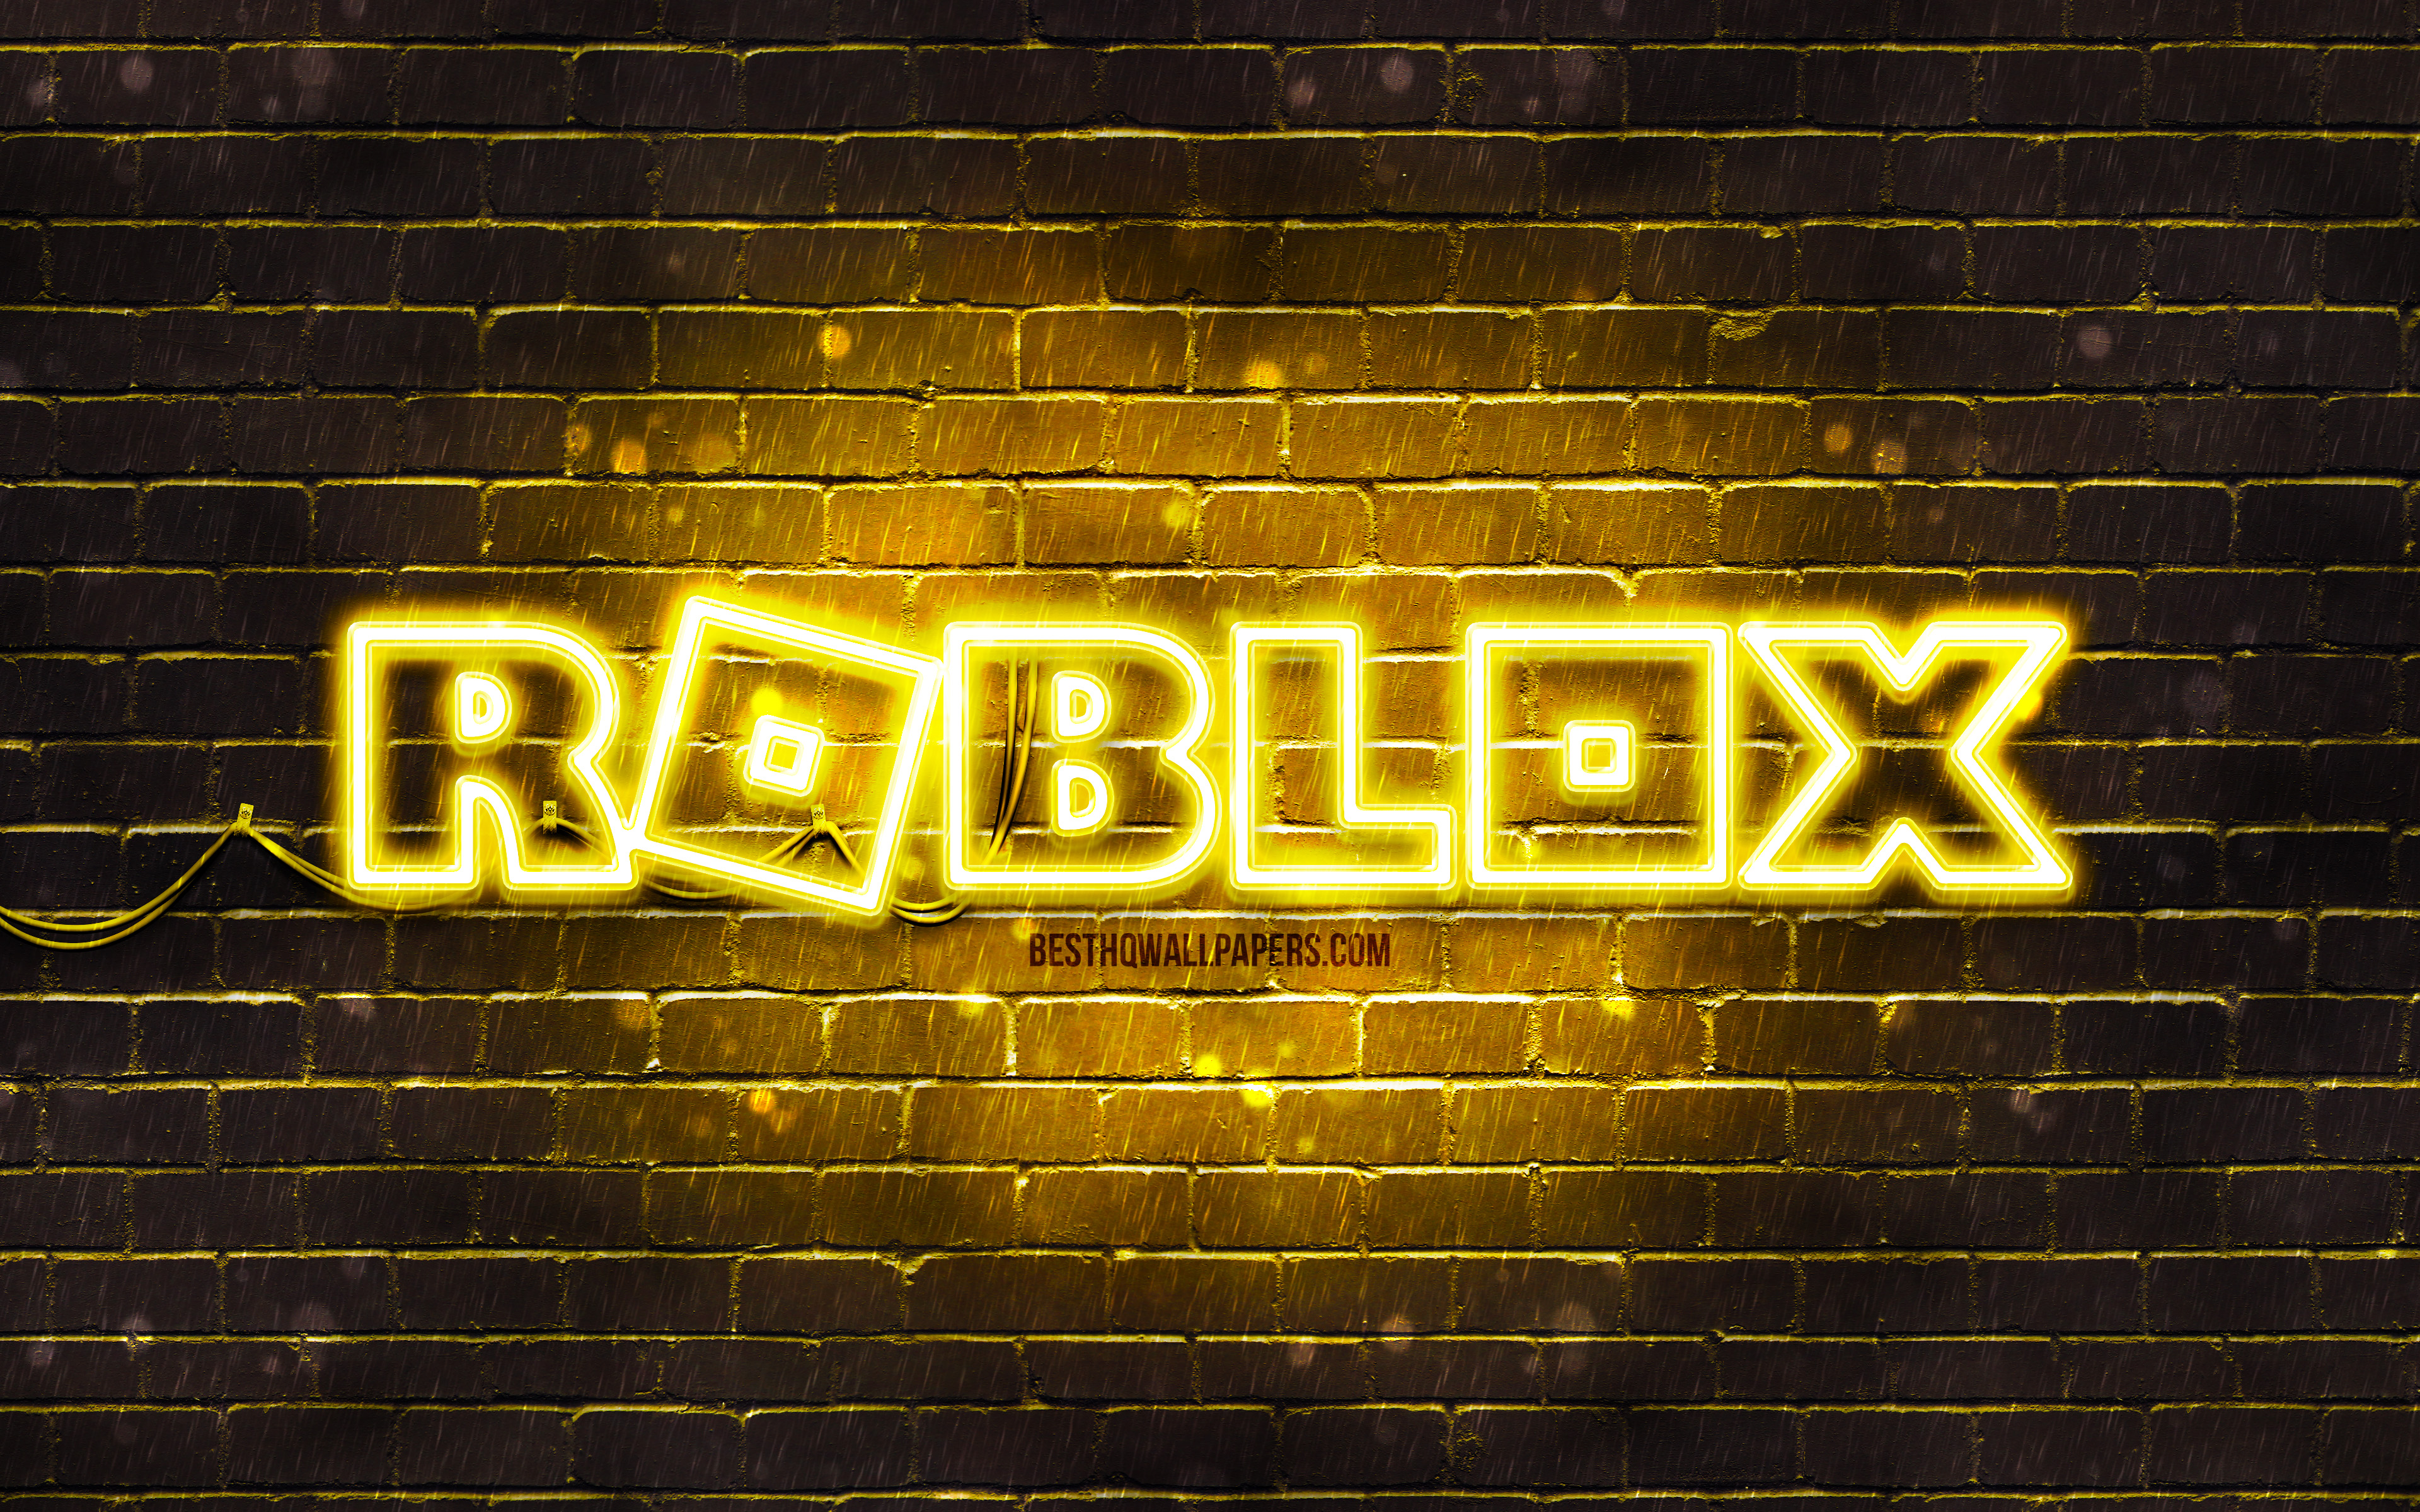 Download wallpaper Roblox yellow logo, 4k, yellow brickwall, Roblox logo, online games, Roblox neon logo, Roblox for desktop with resolution 3840x2400. High Quality HD picture wallpaper